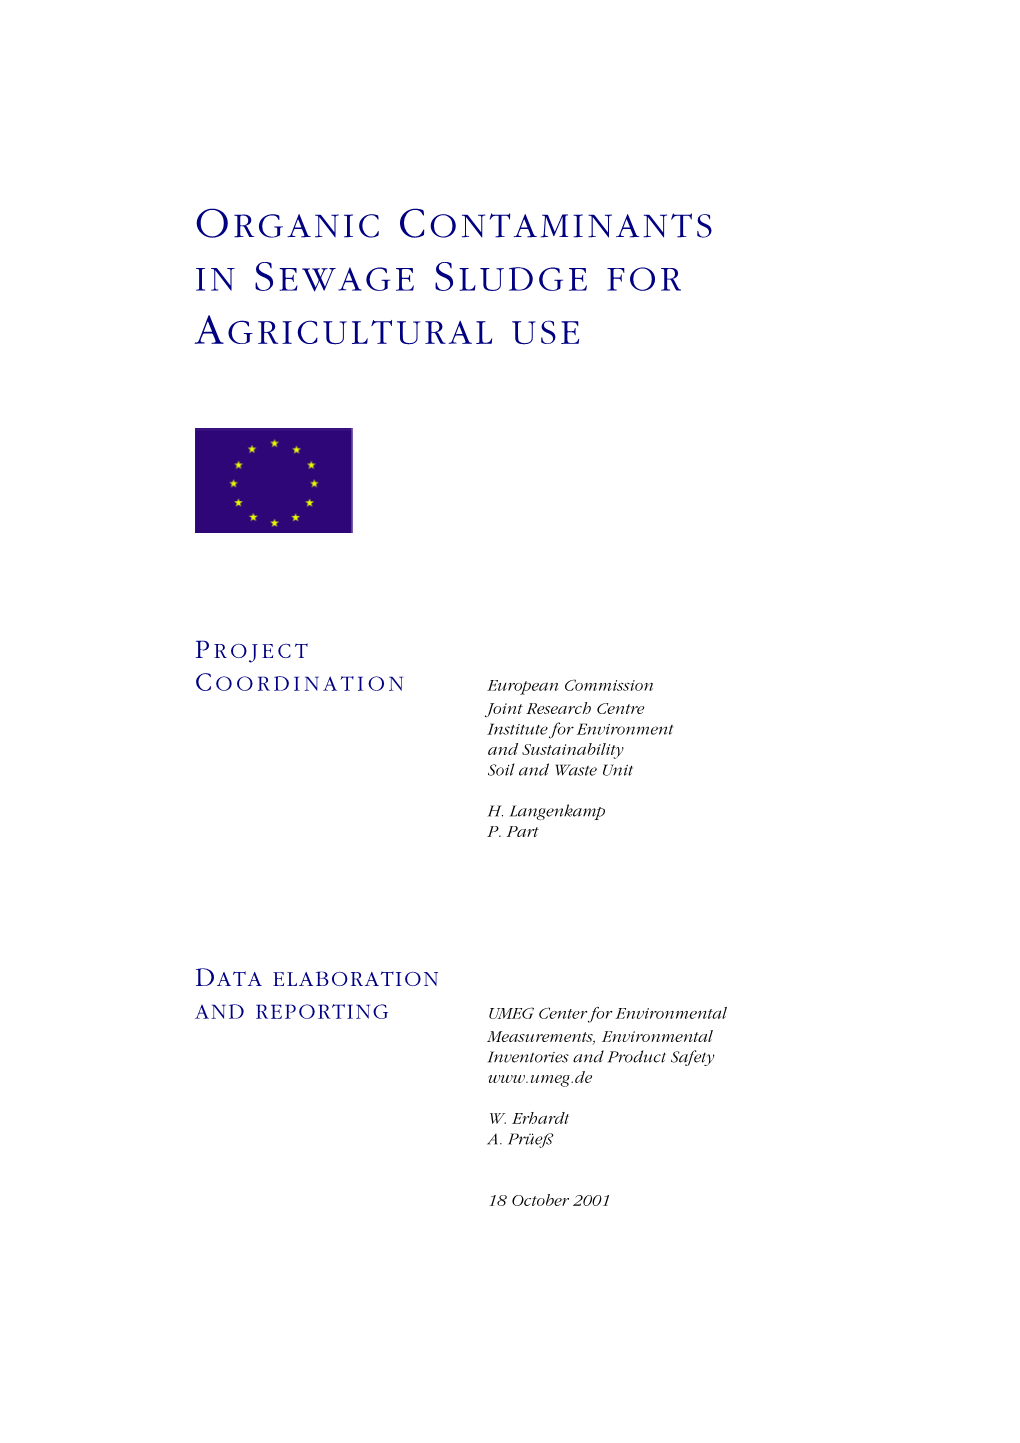 Organic Contaminants in Sewage Sludge for Agricultural Use